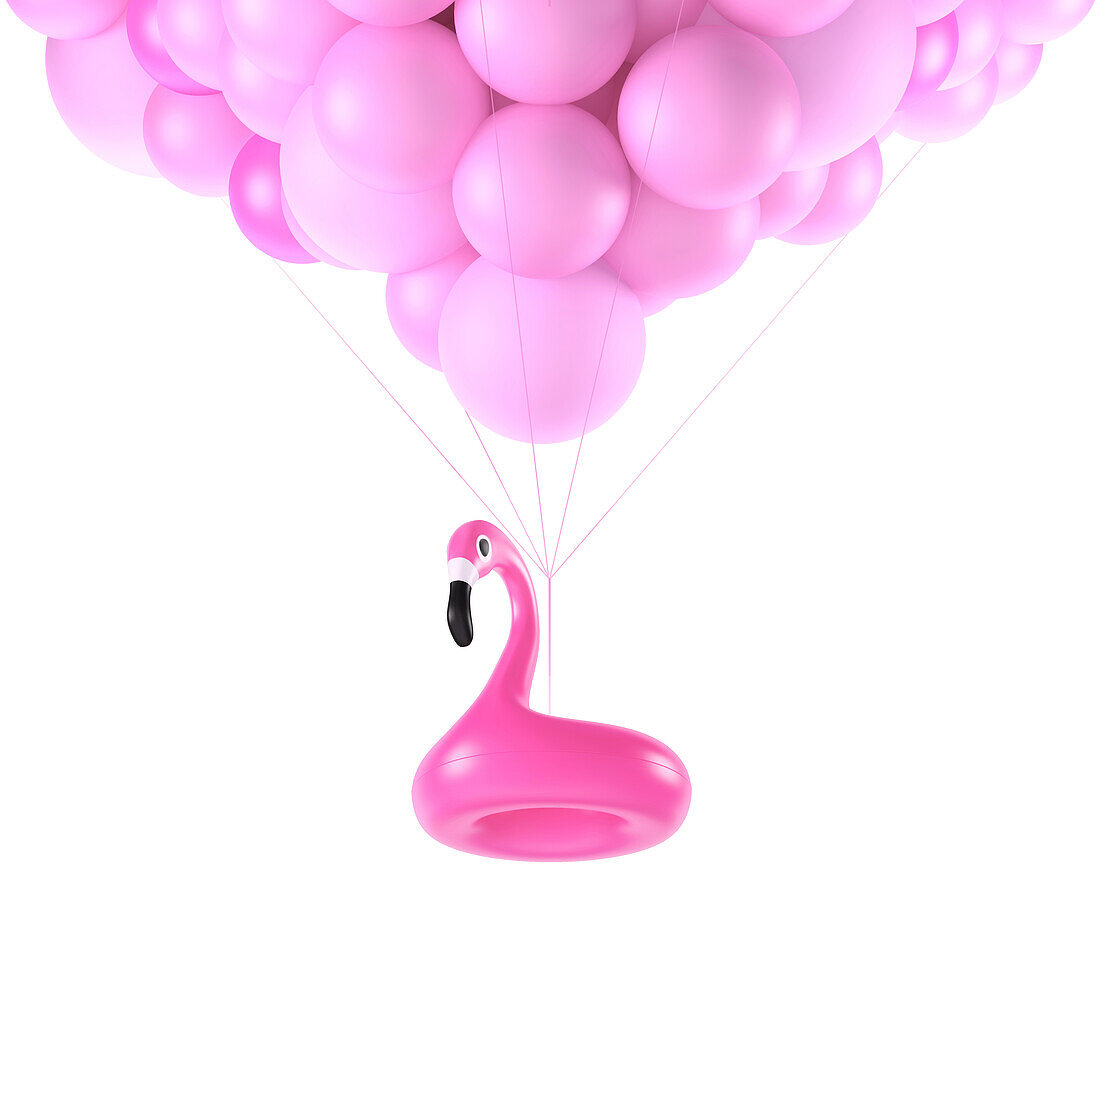 Pink inflatable flamingo pulled by balloons, illustration